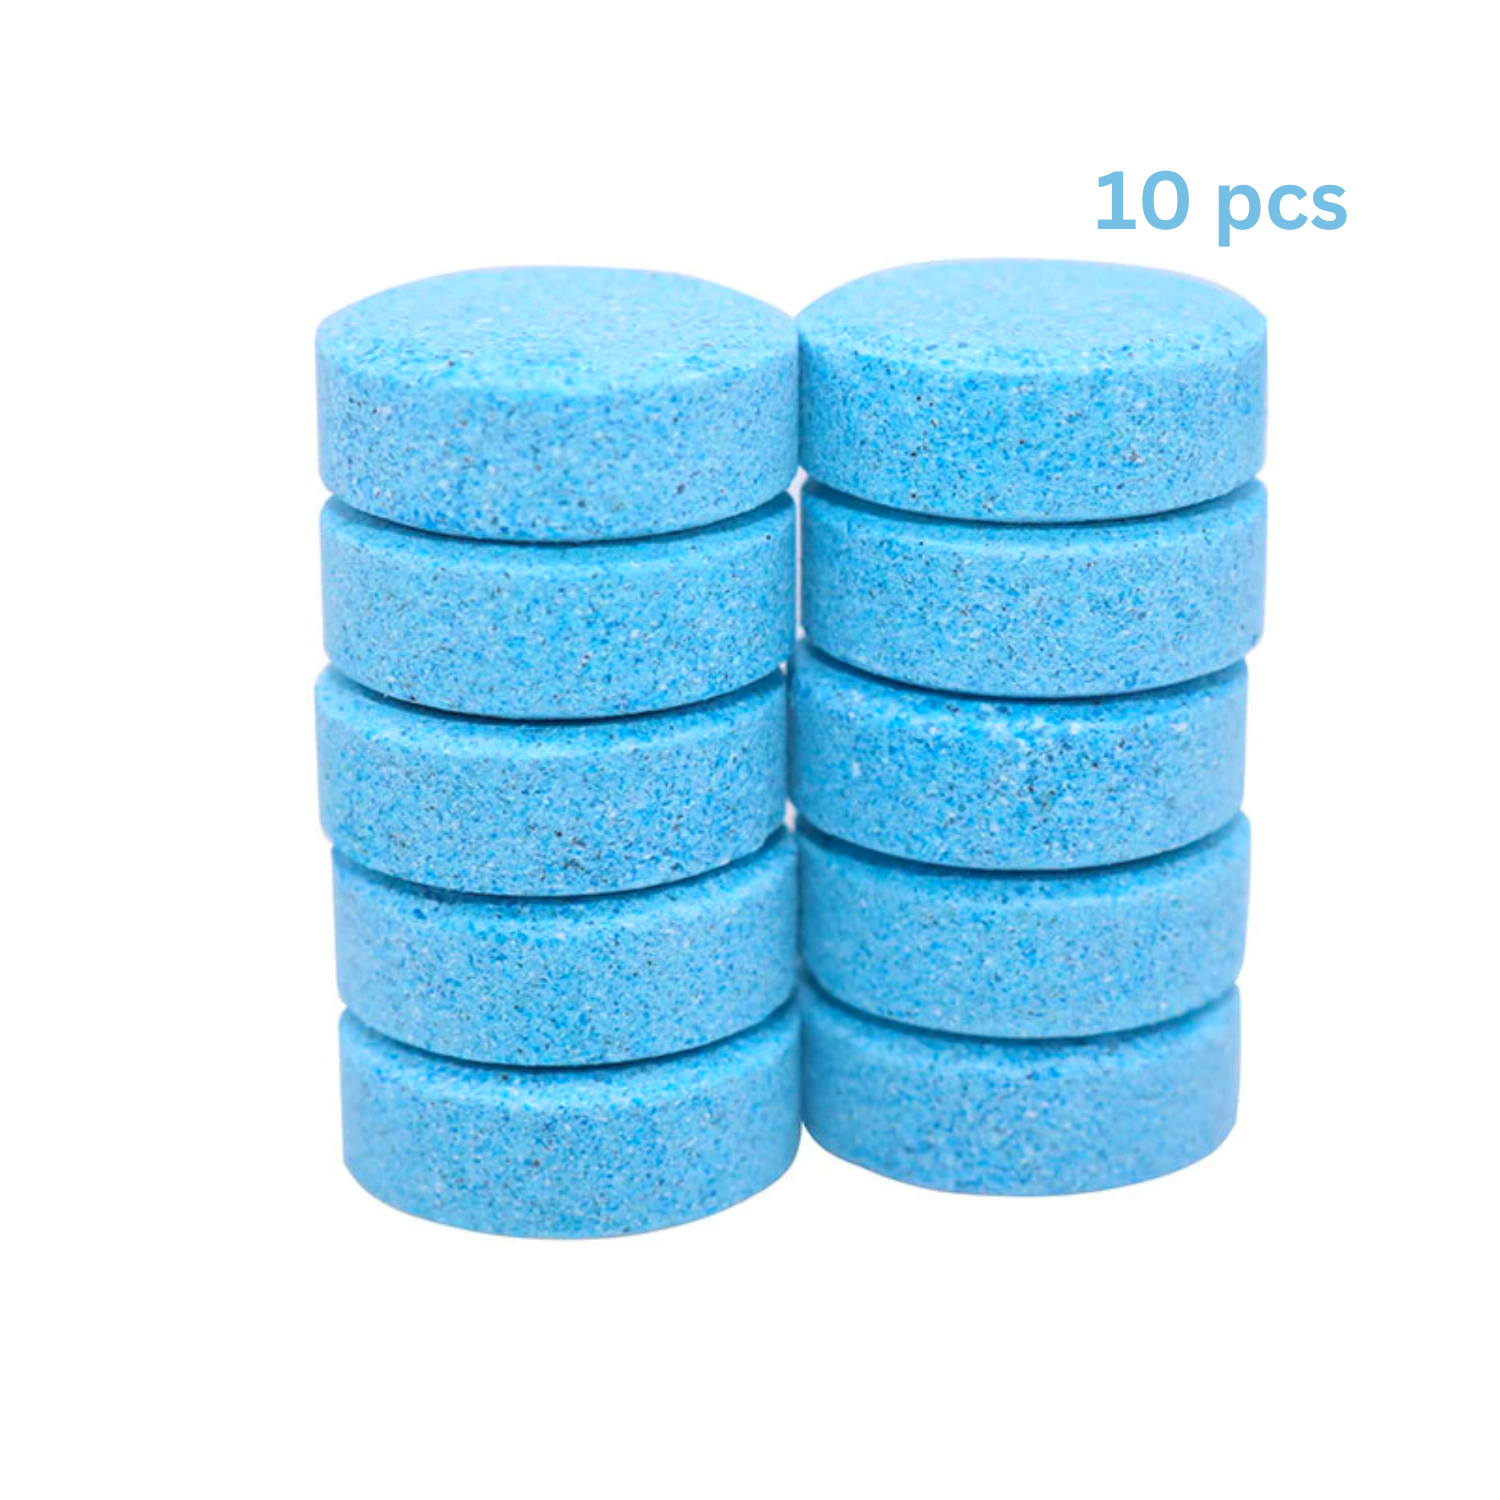 car windshield glass washer cleaner compact effervescent tablets detergent